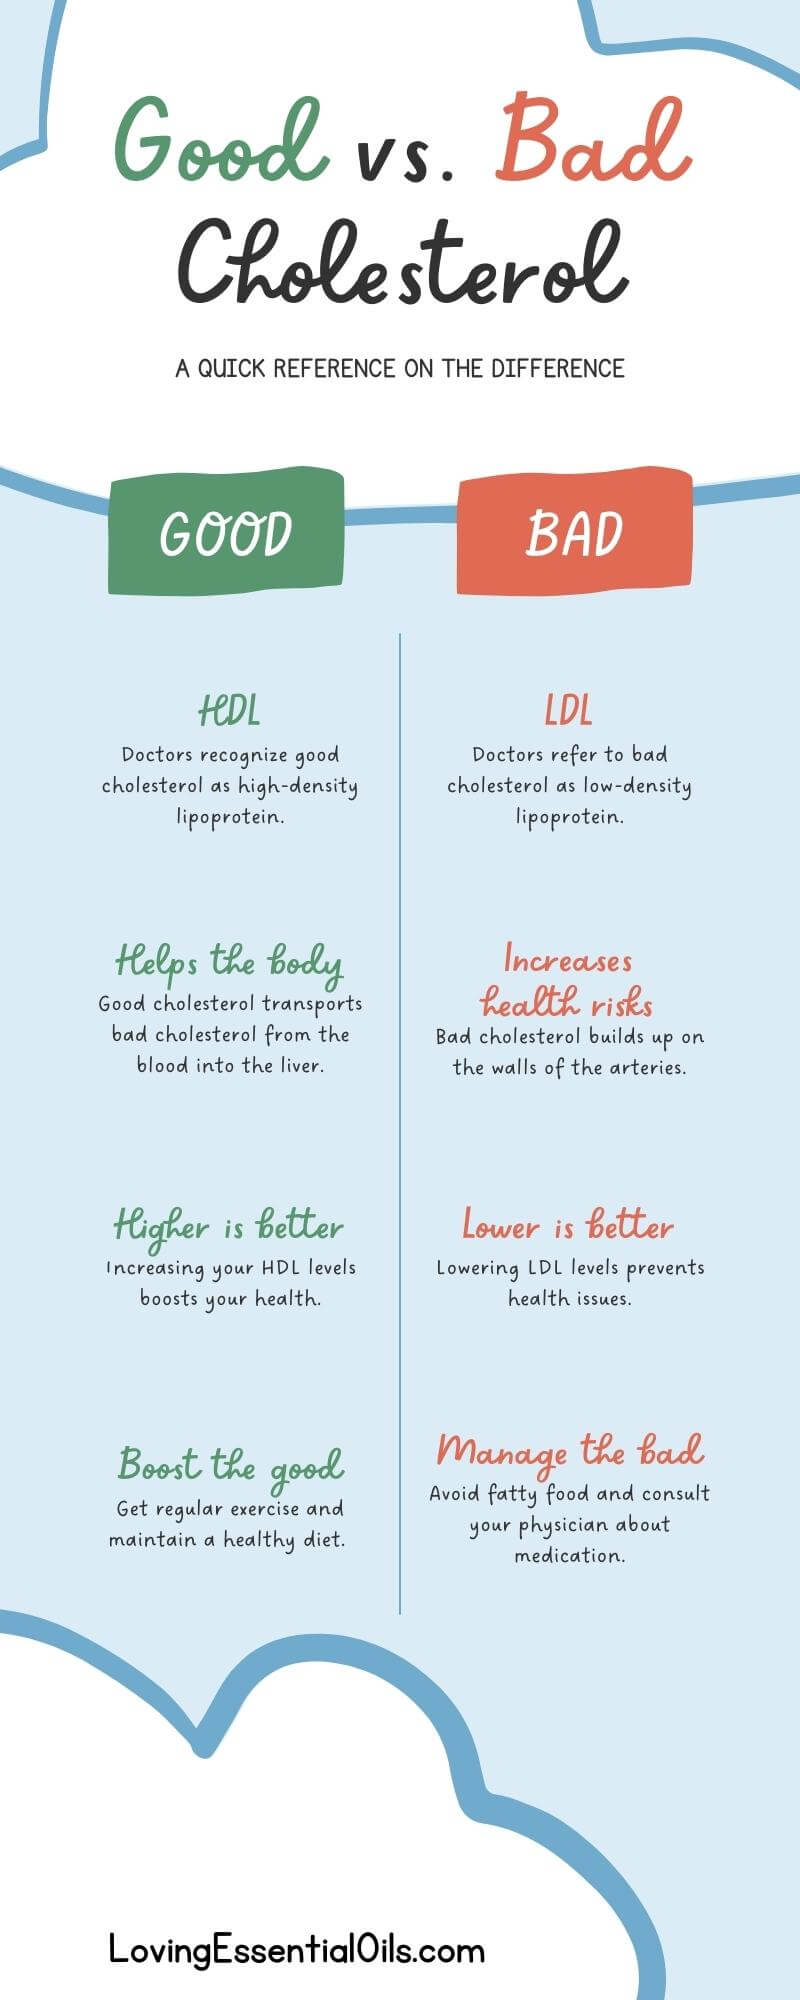 Good vs. Bad Cholesterol Infographic by Loving Essential Oils